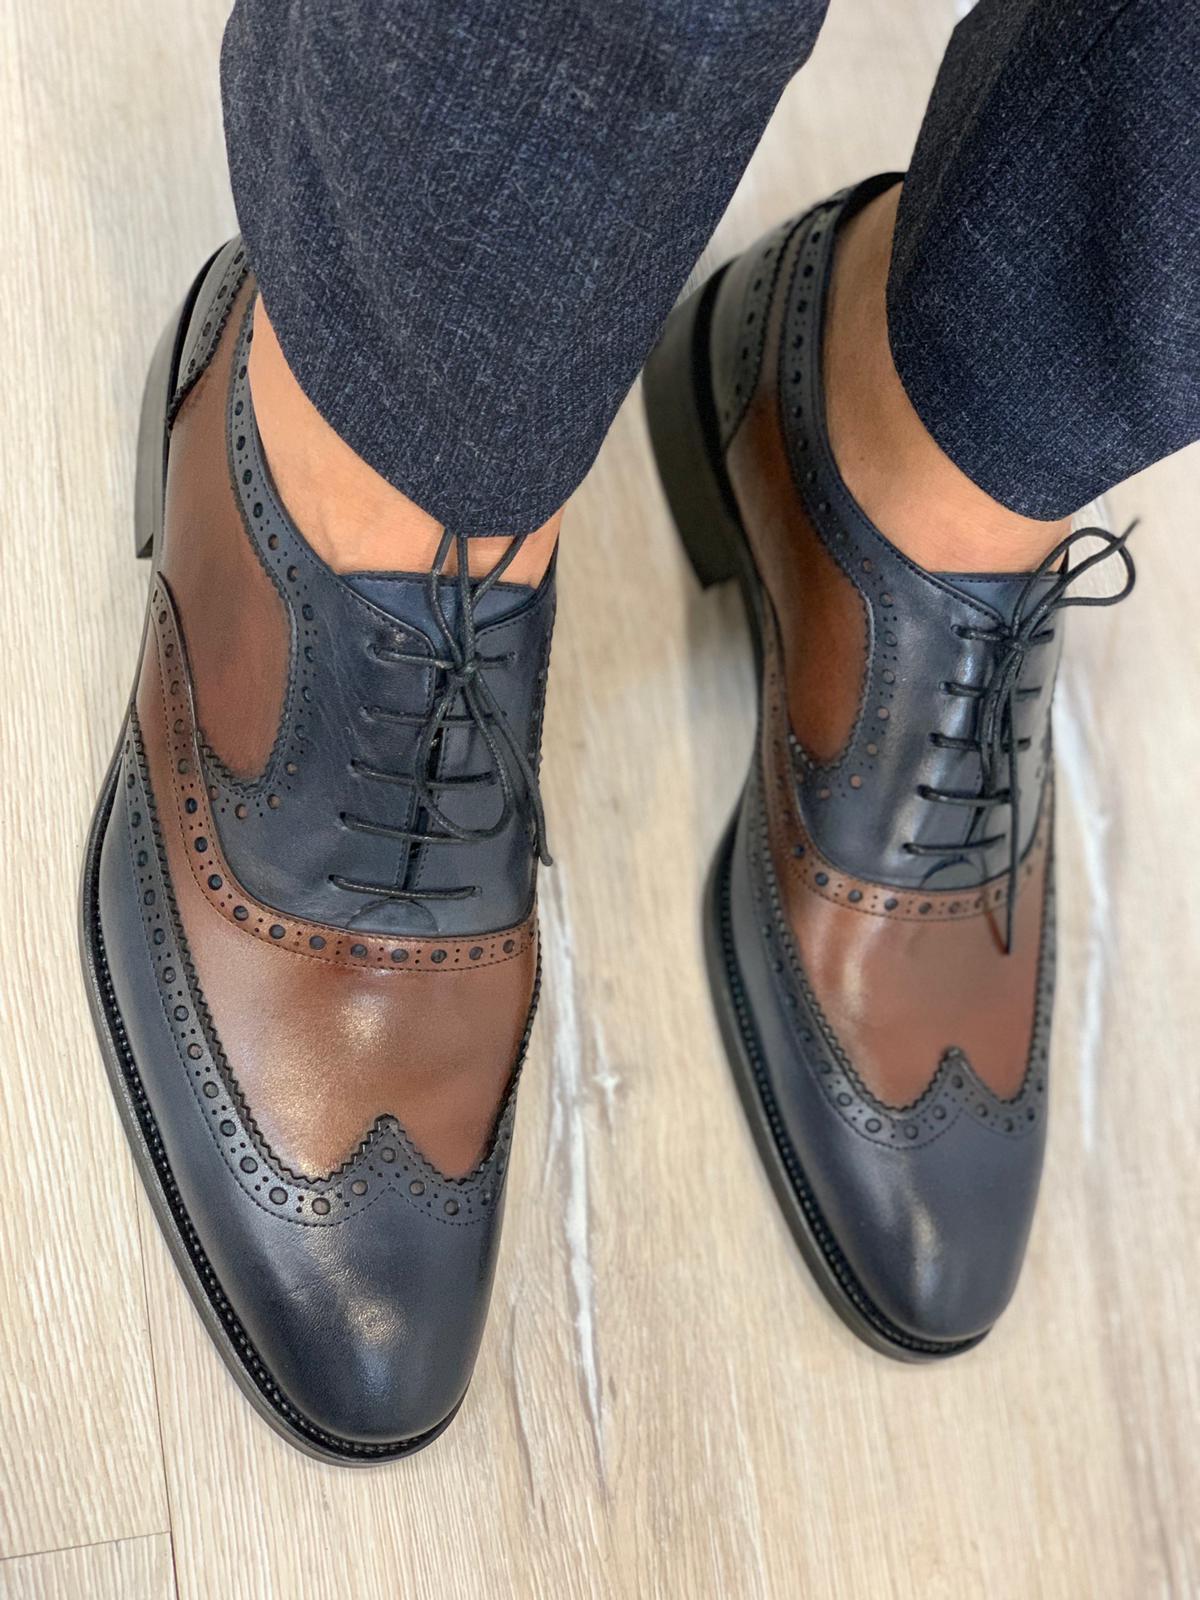 Marc Limited Shoes in Brown/Navy